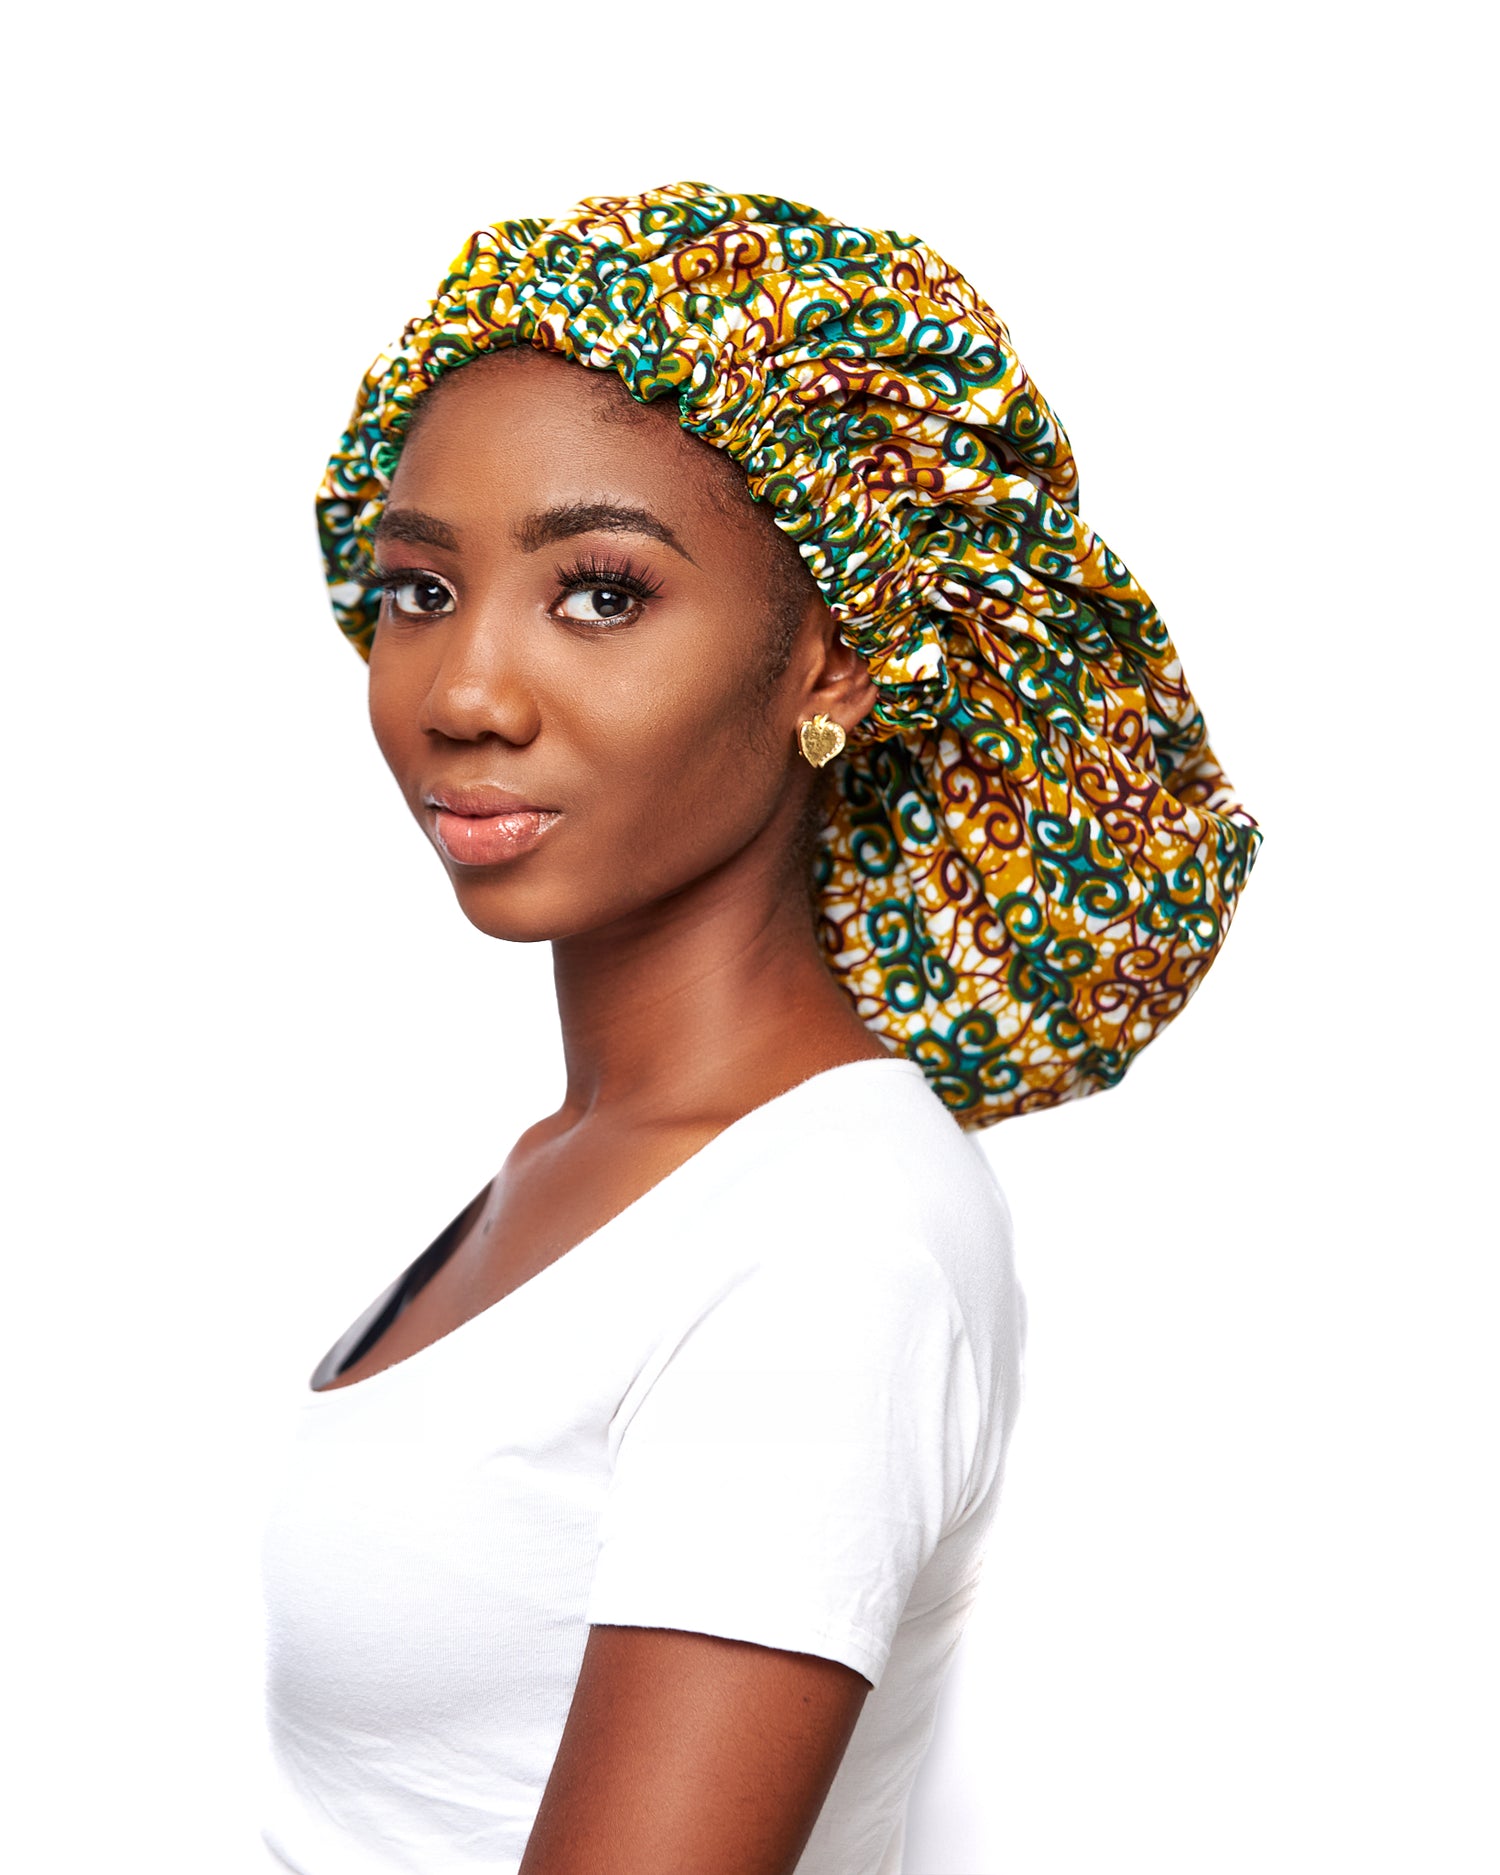 Ankara Wax Print Made of Gold, Green,Redwine and White  Blend of Beautiful Colours And Pattern, Hand Made Elastic With Gold Silk lined Hair Bonnet